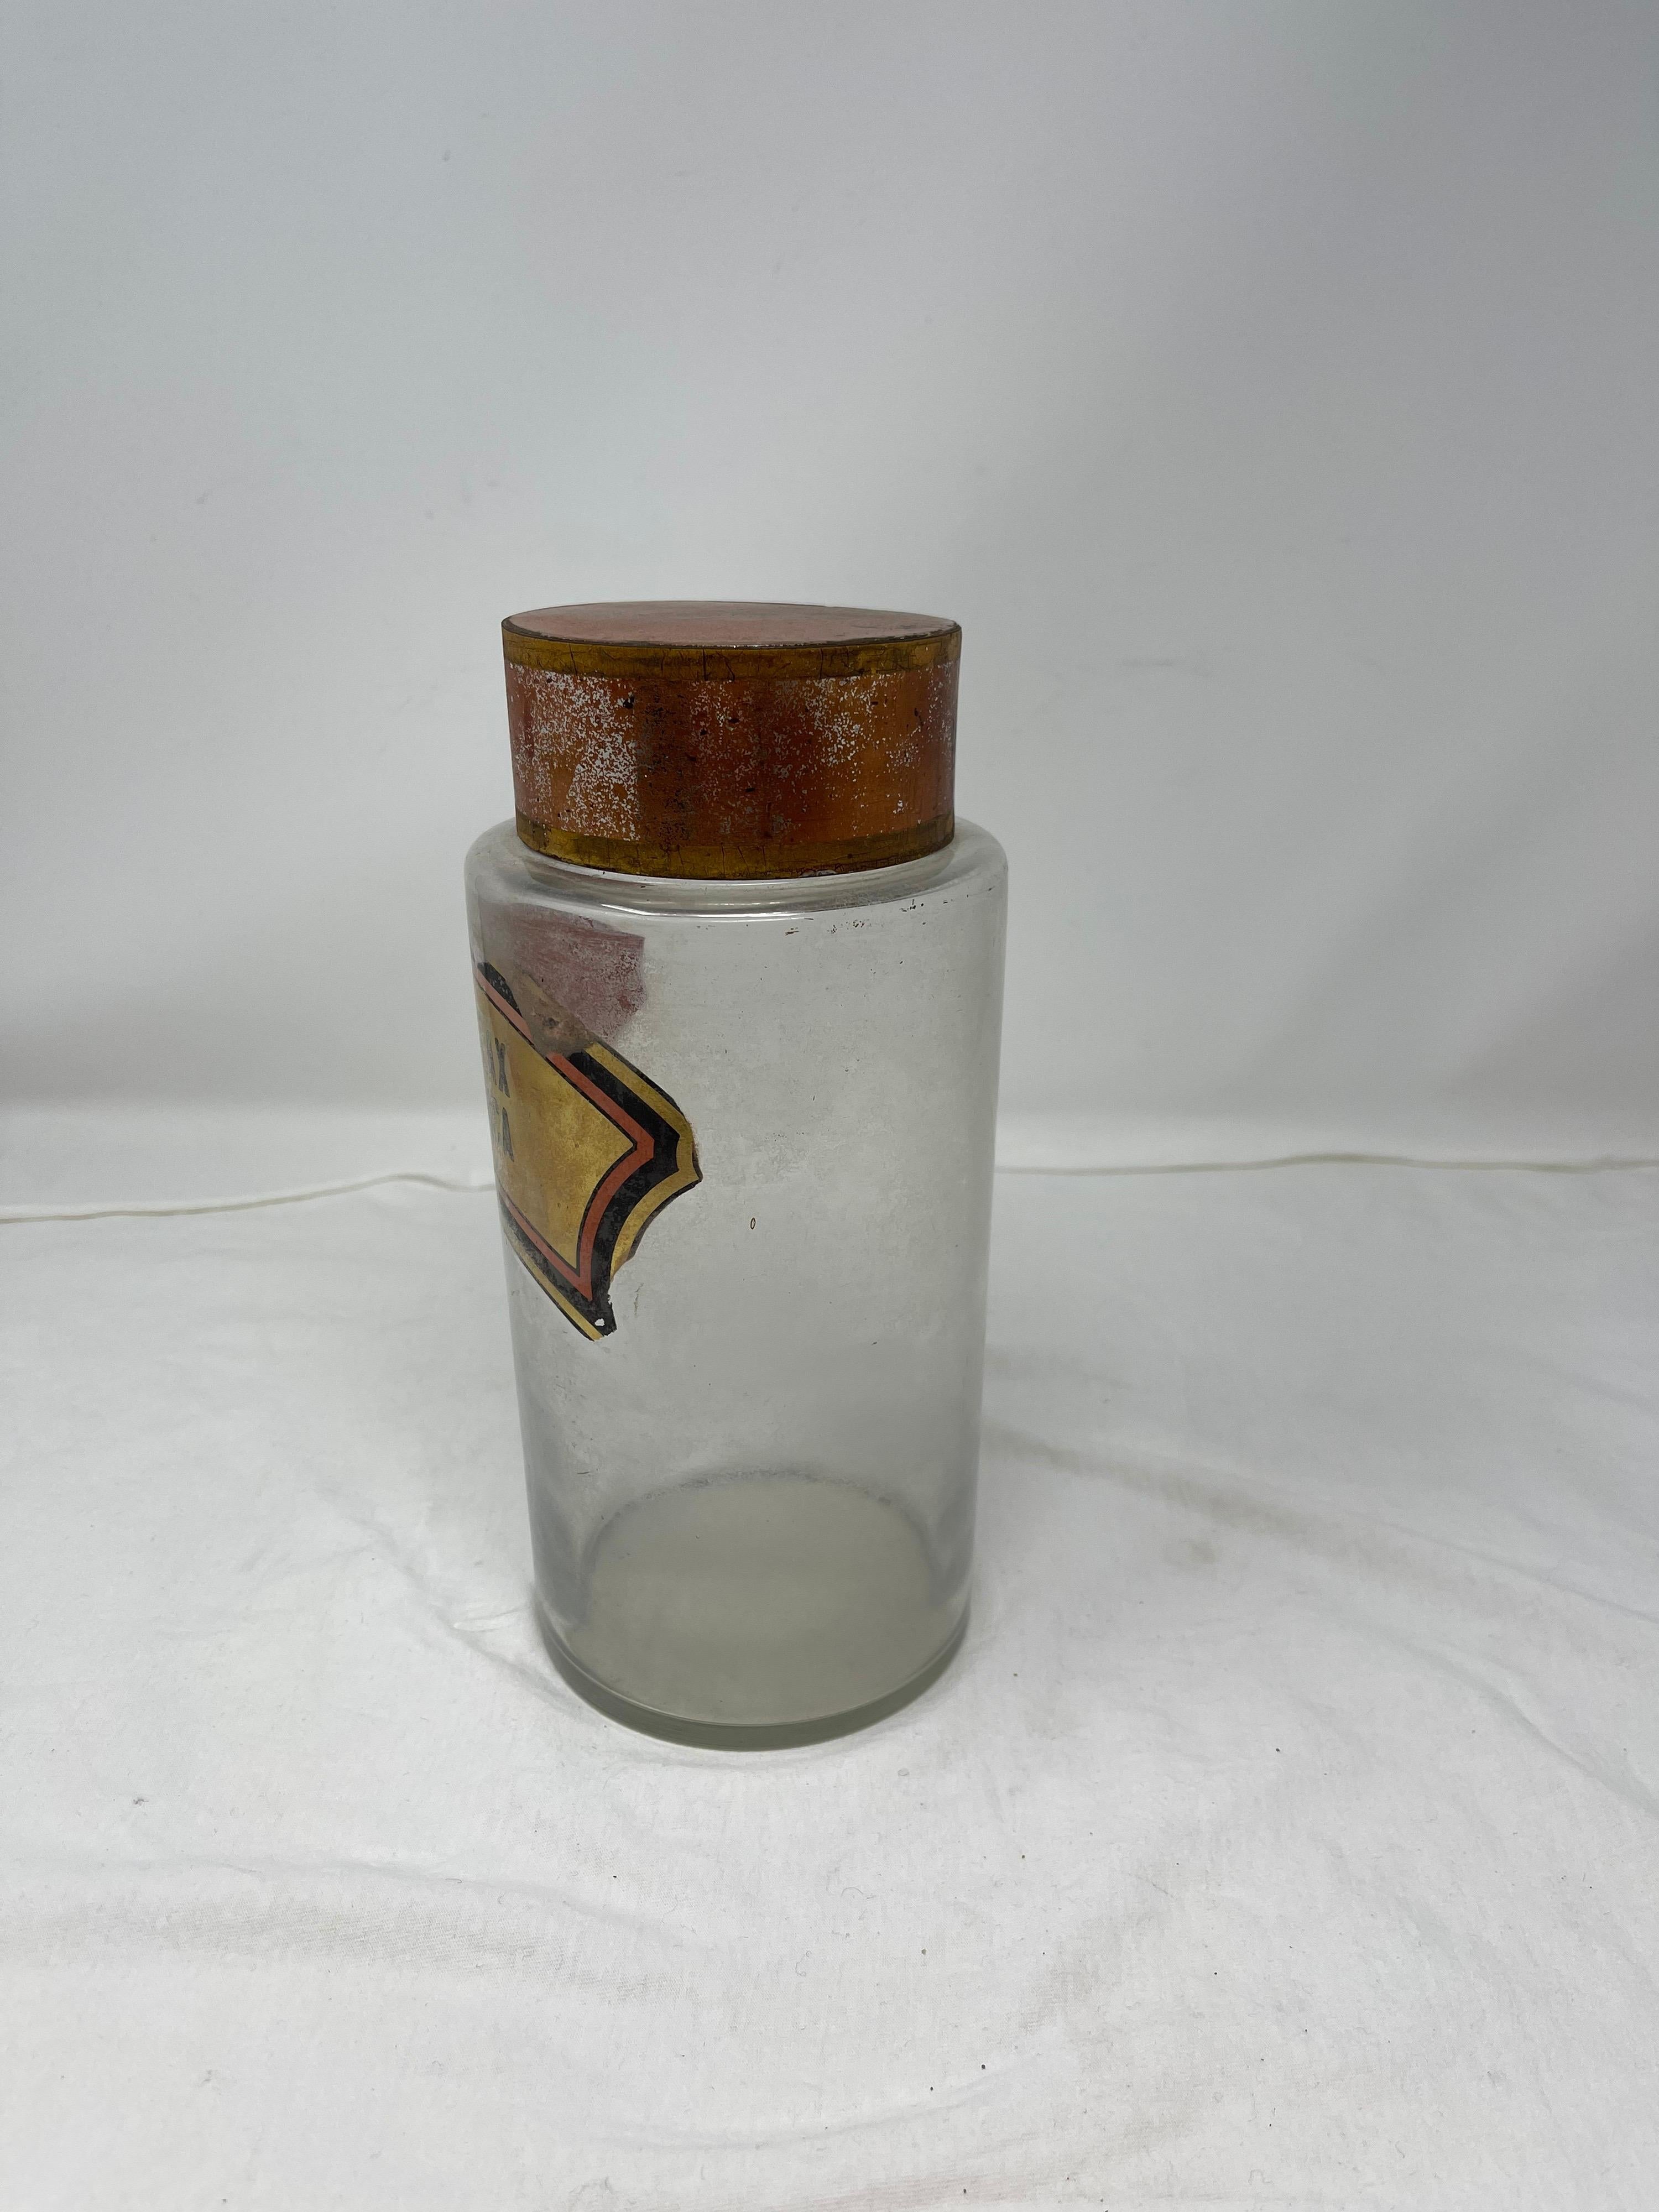 Antique Pharmacy Jar “Smilax Medica” In Good Condition For Sale In Houston, TX